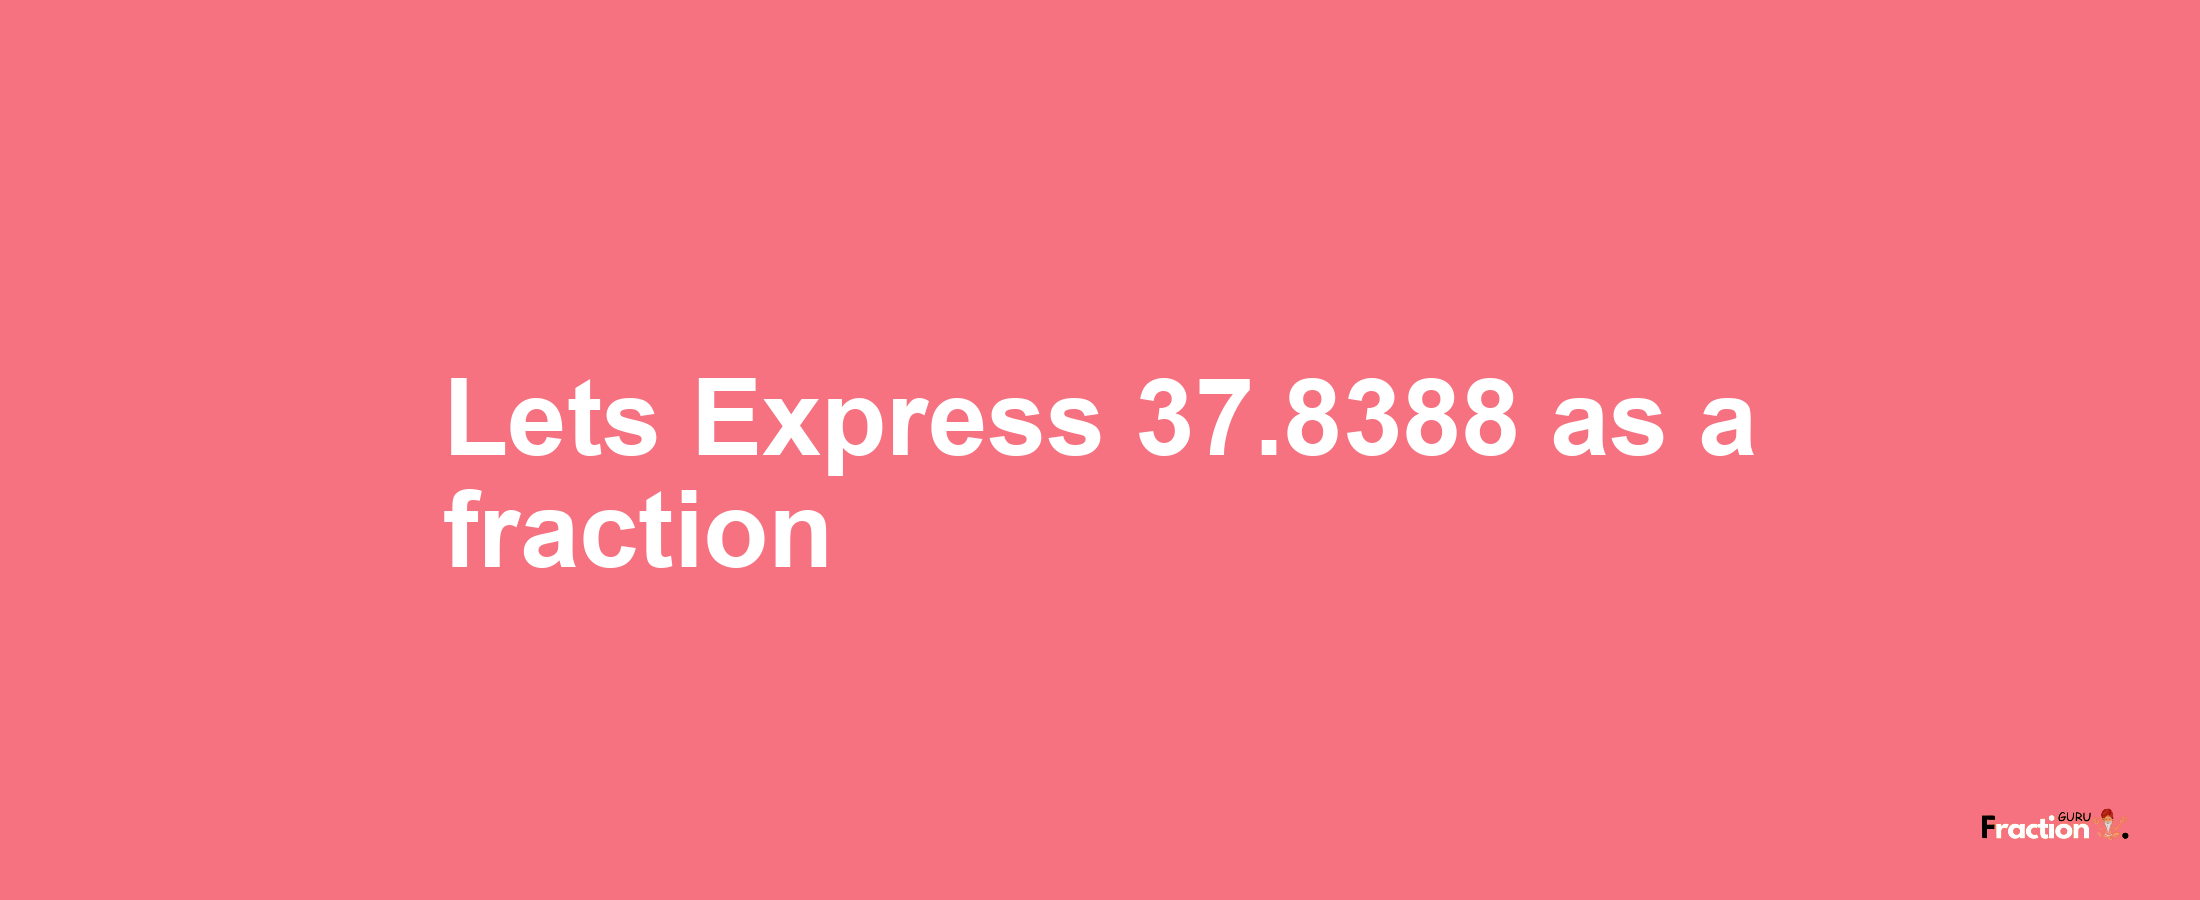 Lets Express 37.8388 as afraction